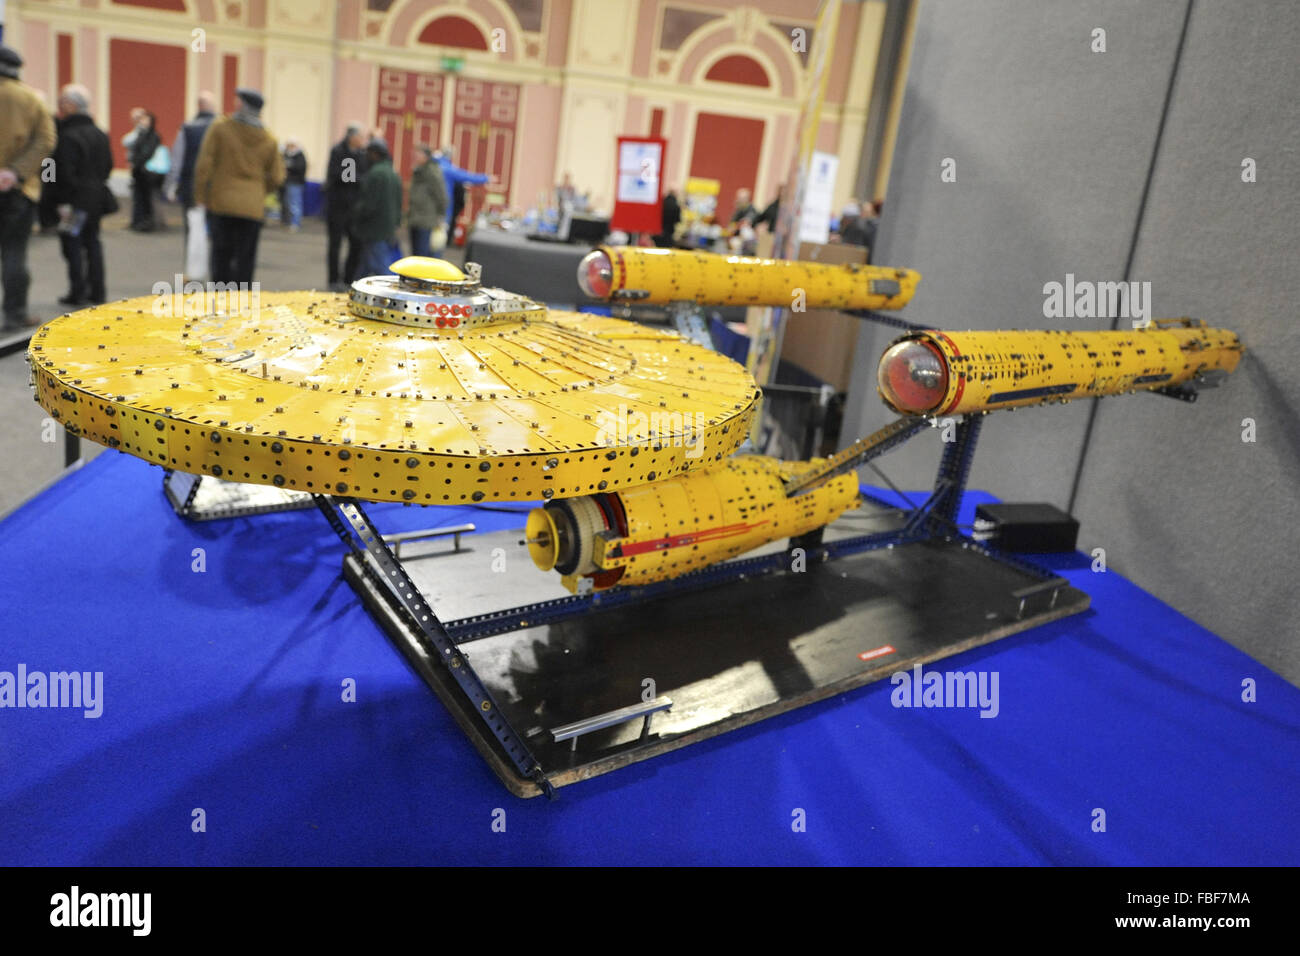 London, UK. 15th Jan, 2016. A Meccano model of NCC-1701, the starship USS Enterprise (created by Philip Webb, Chair of the International Society of Meccanomen) on display at the London Model Engineering Exhibition which opened today at Alexandra Palace, London. Credit:  Michael Preston/Alamy Live News Stock Photo